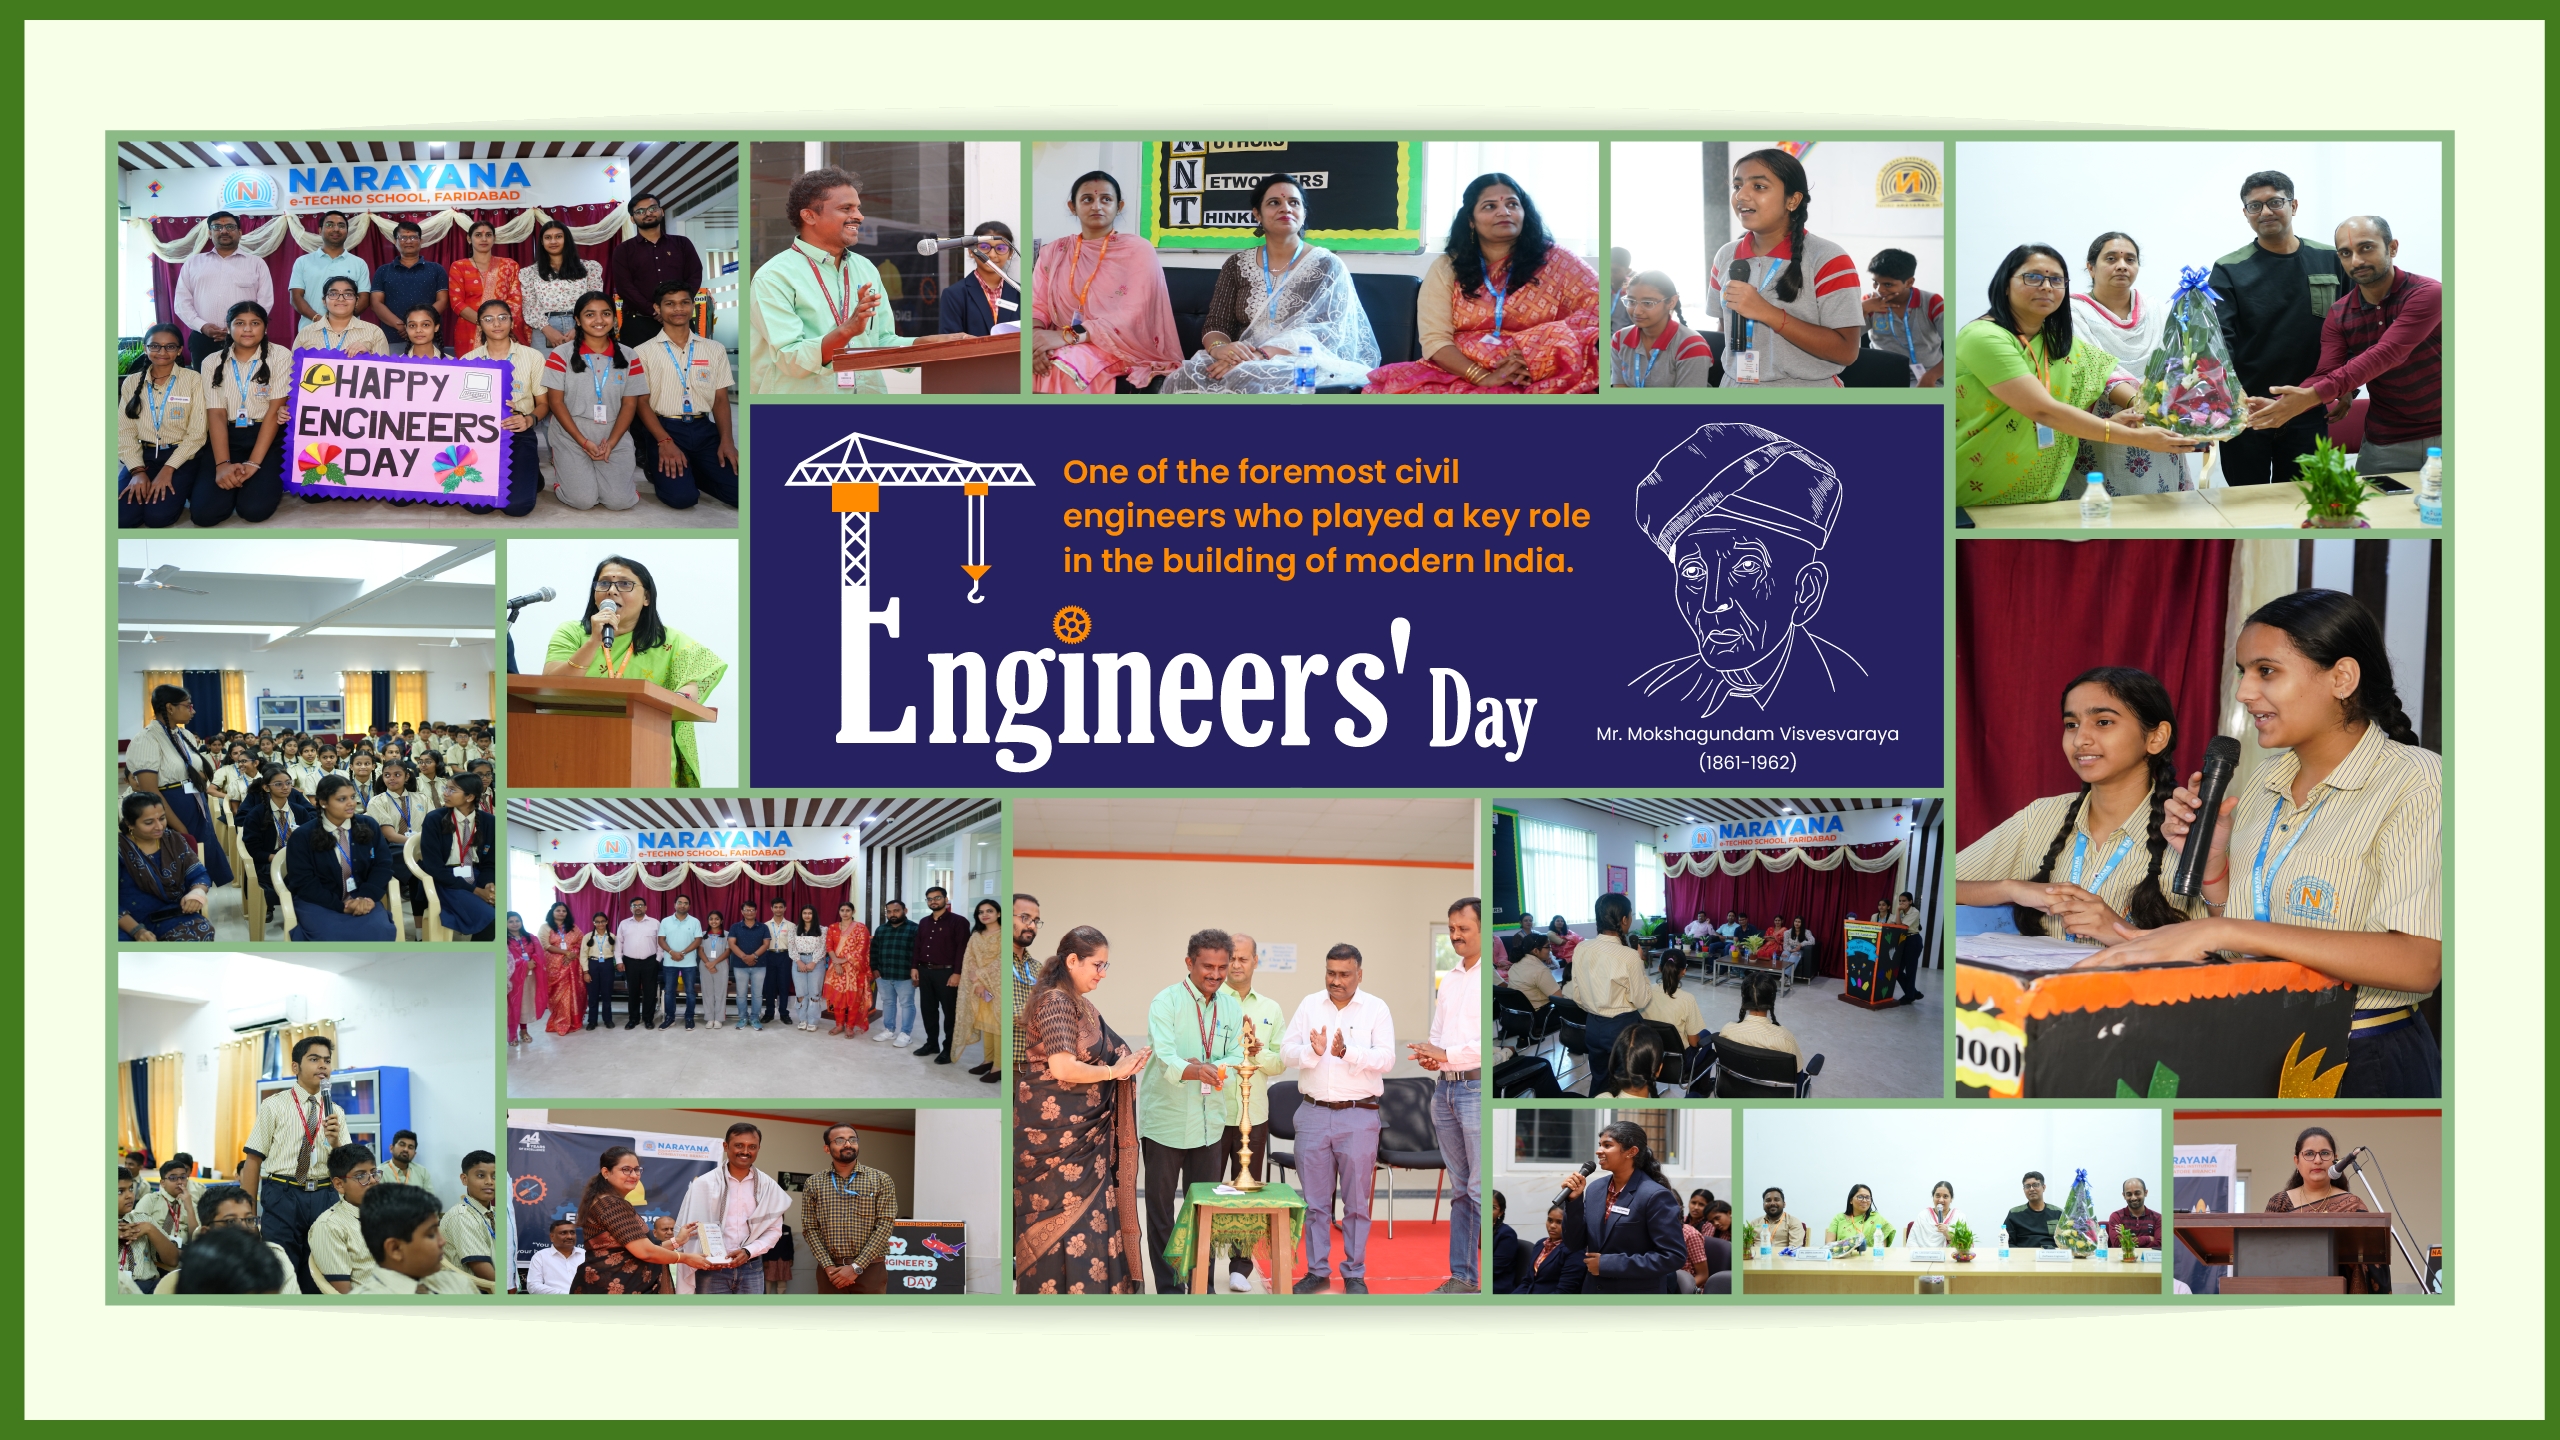 Engineering the Future: Narayana schools inspire young minds on Engineers’ Day